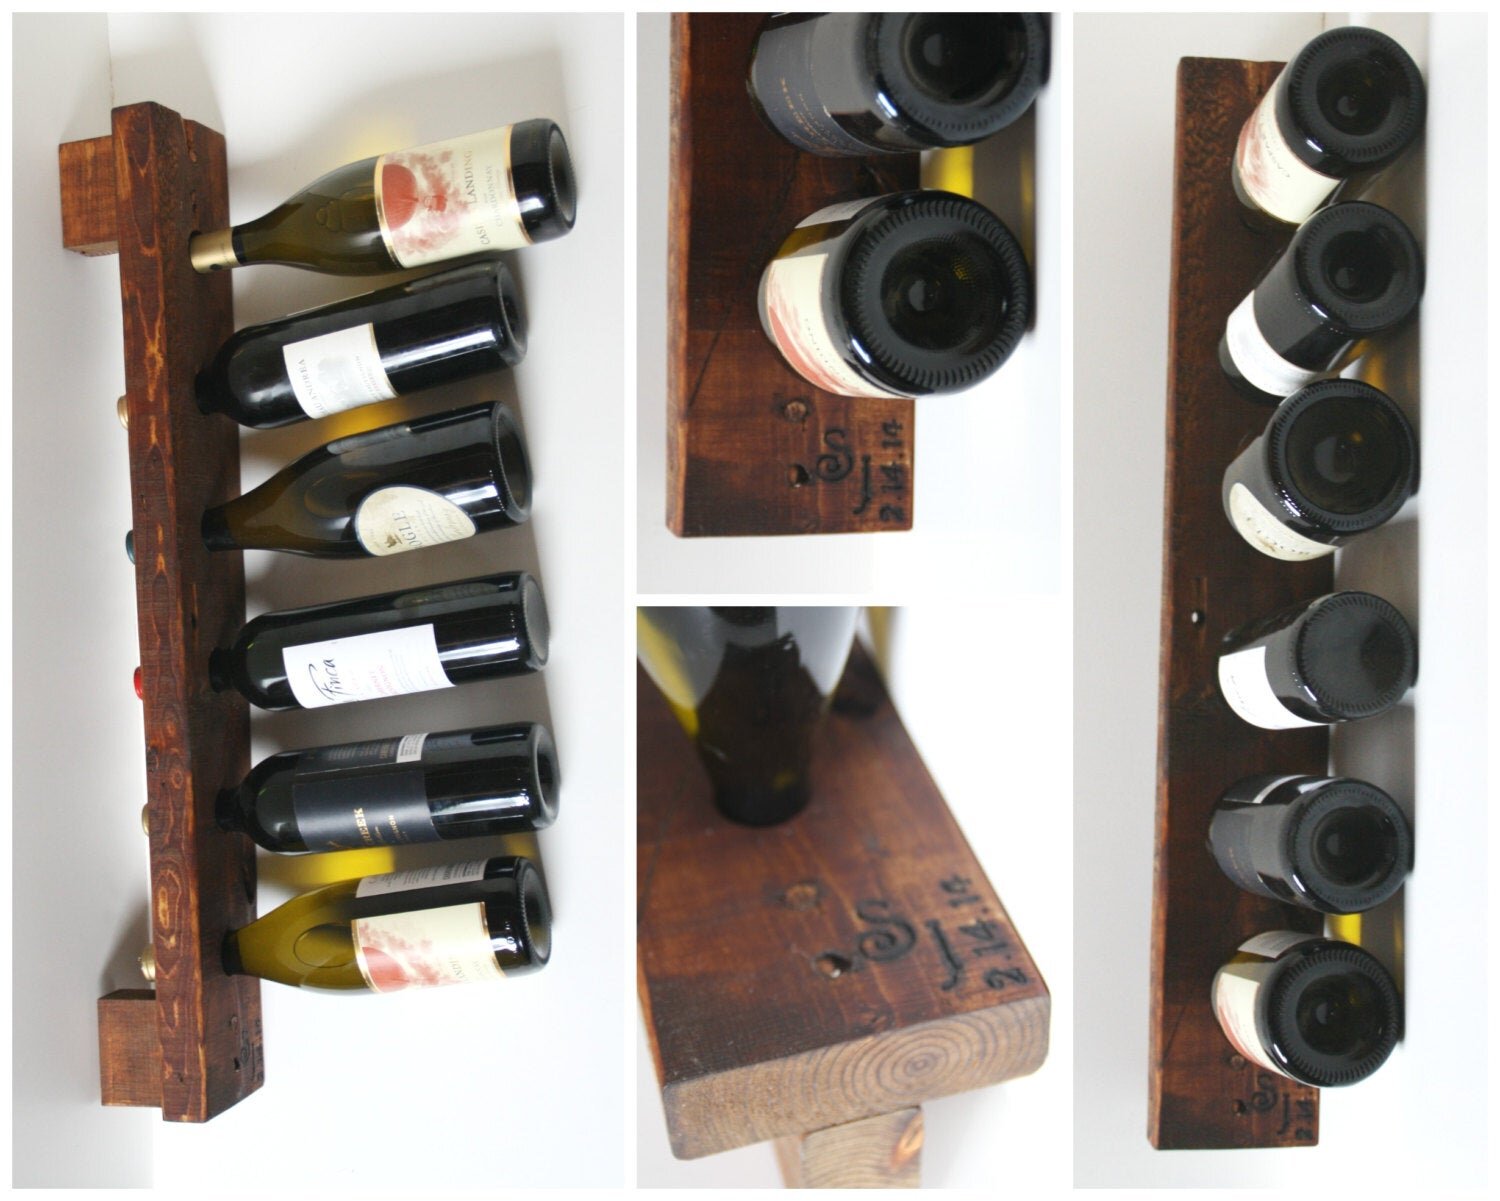 Handcrafted Wood Bottle Holder - Six to Go